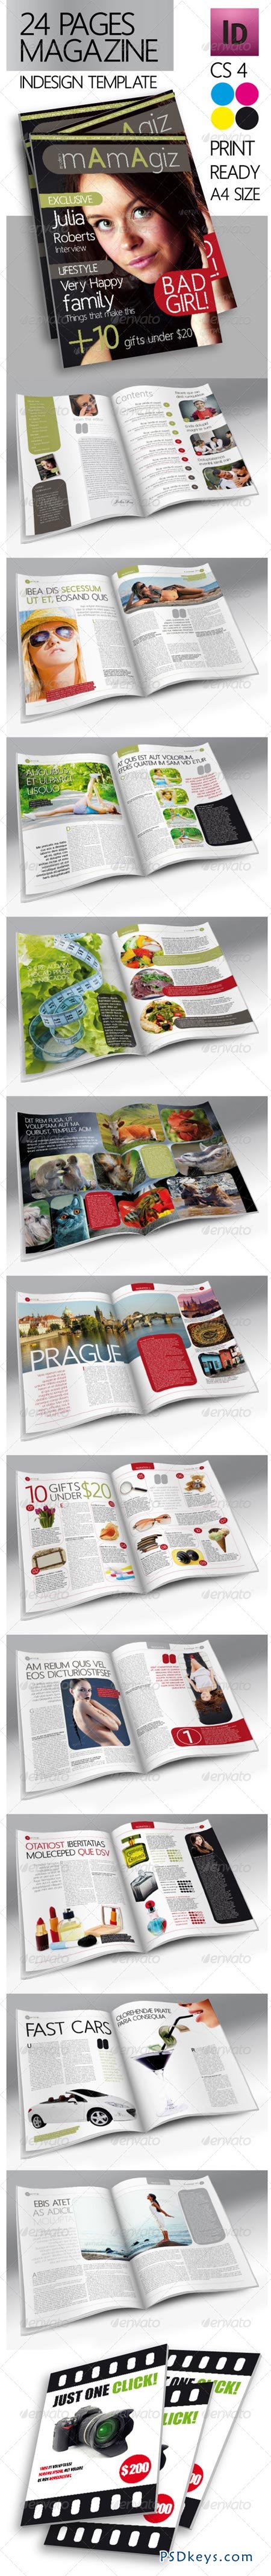 24 Pages Modern Magazine InDesign Template 2461242